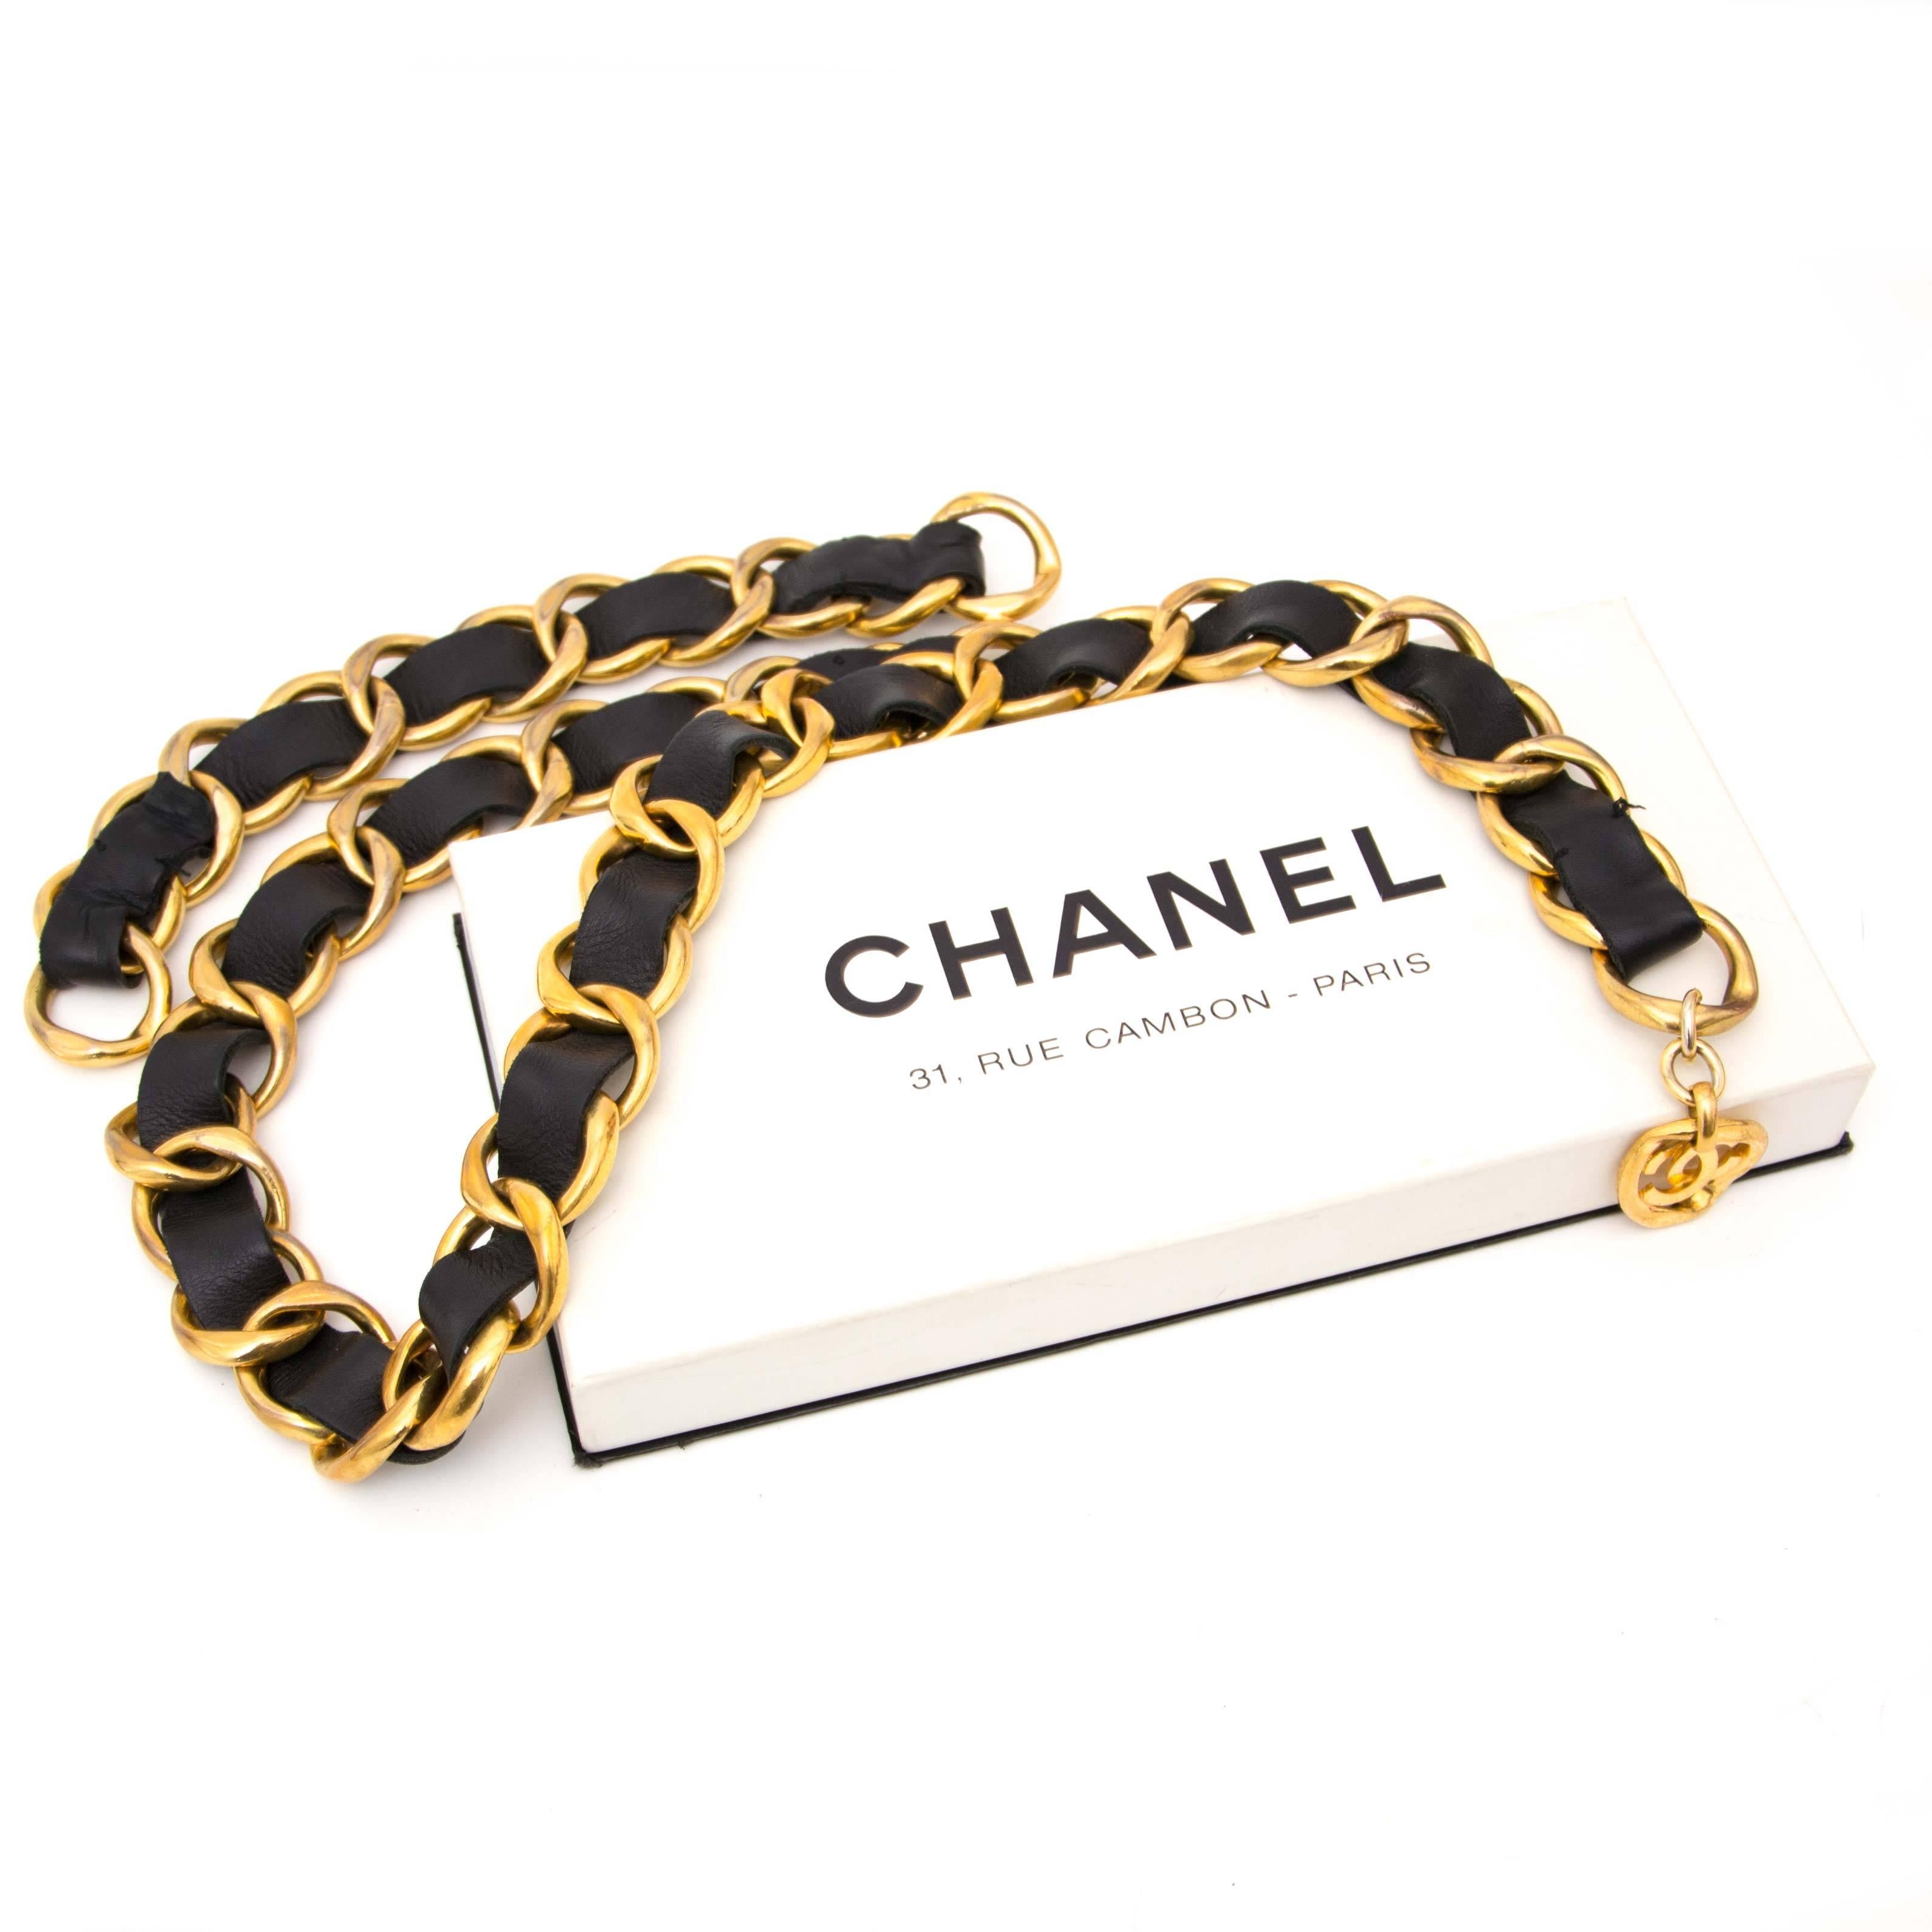 Chanel Black Vintage Leather Weave Swag Belt

 This fabulous black Chanel weave belt is made out of gold toned oval links featuring black leather treads. The long leather weave hanging section hooks onto the lower level of the belt to create a swag